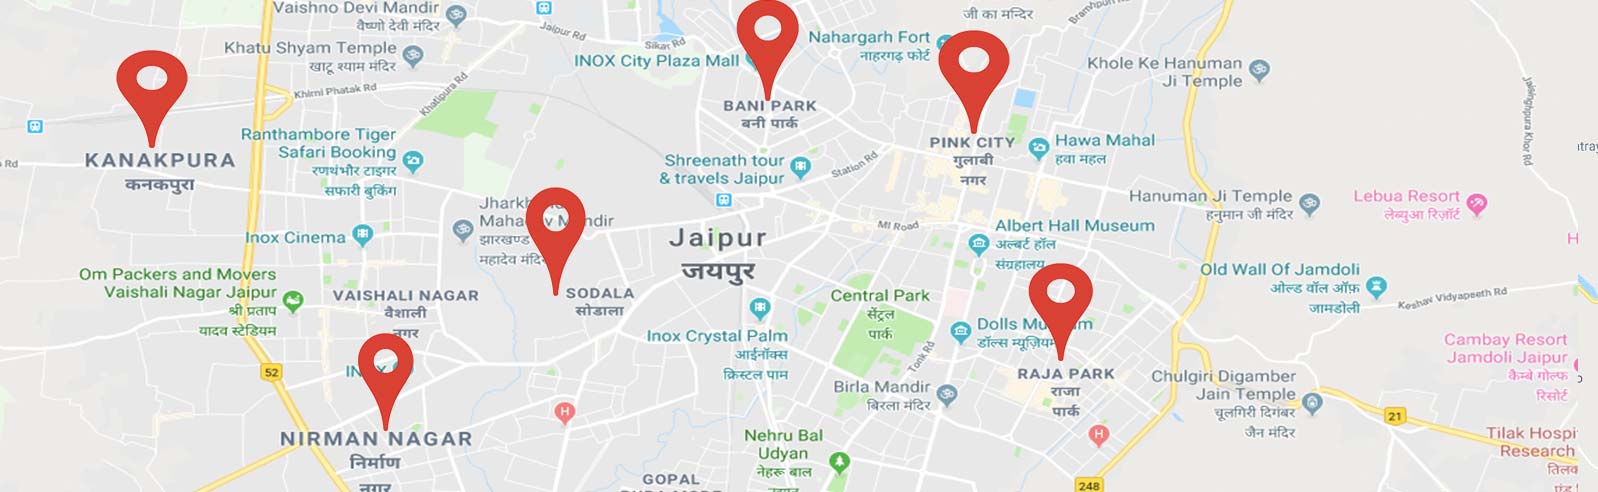 affordable escorts services location map